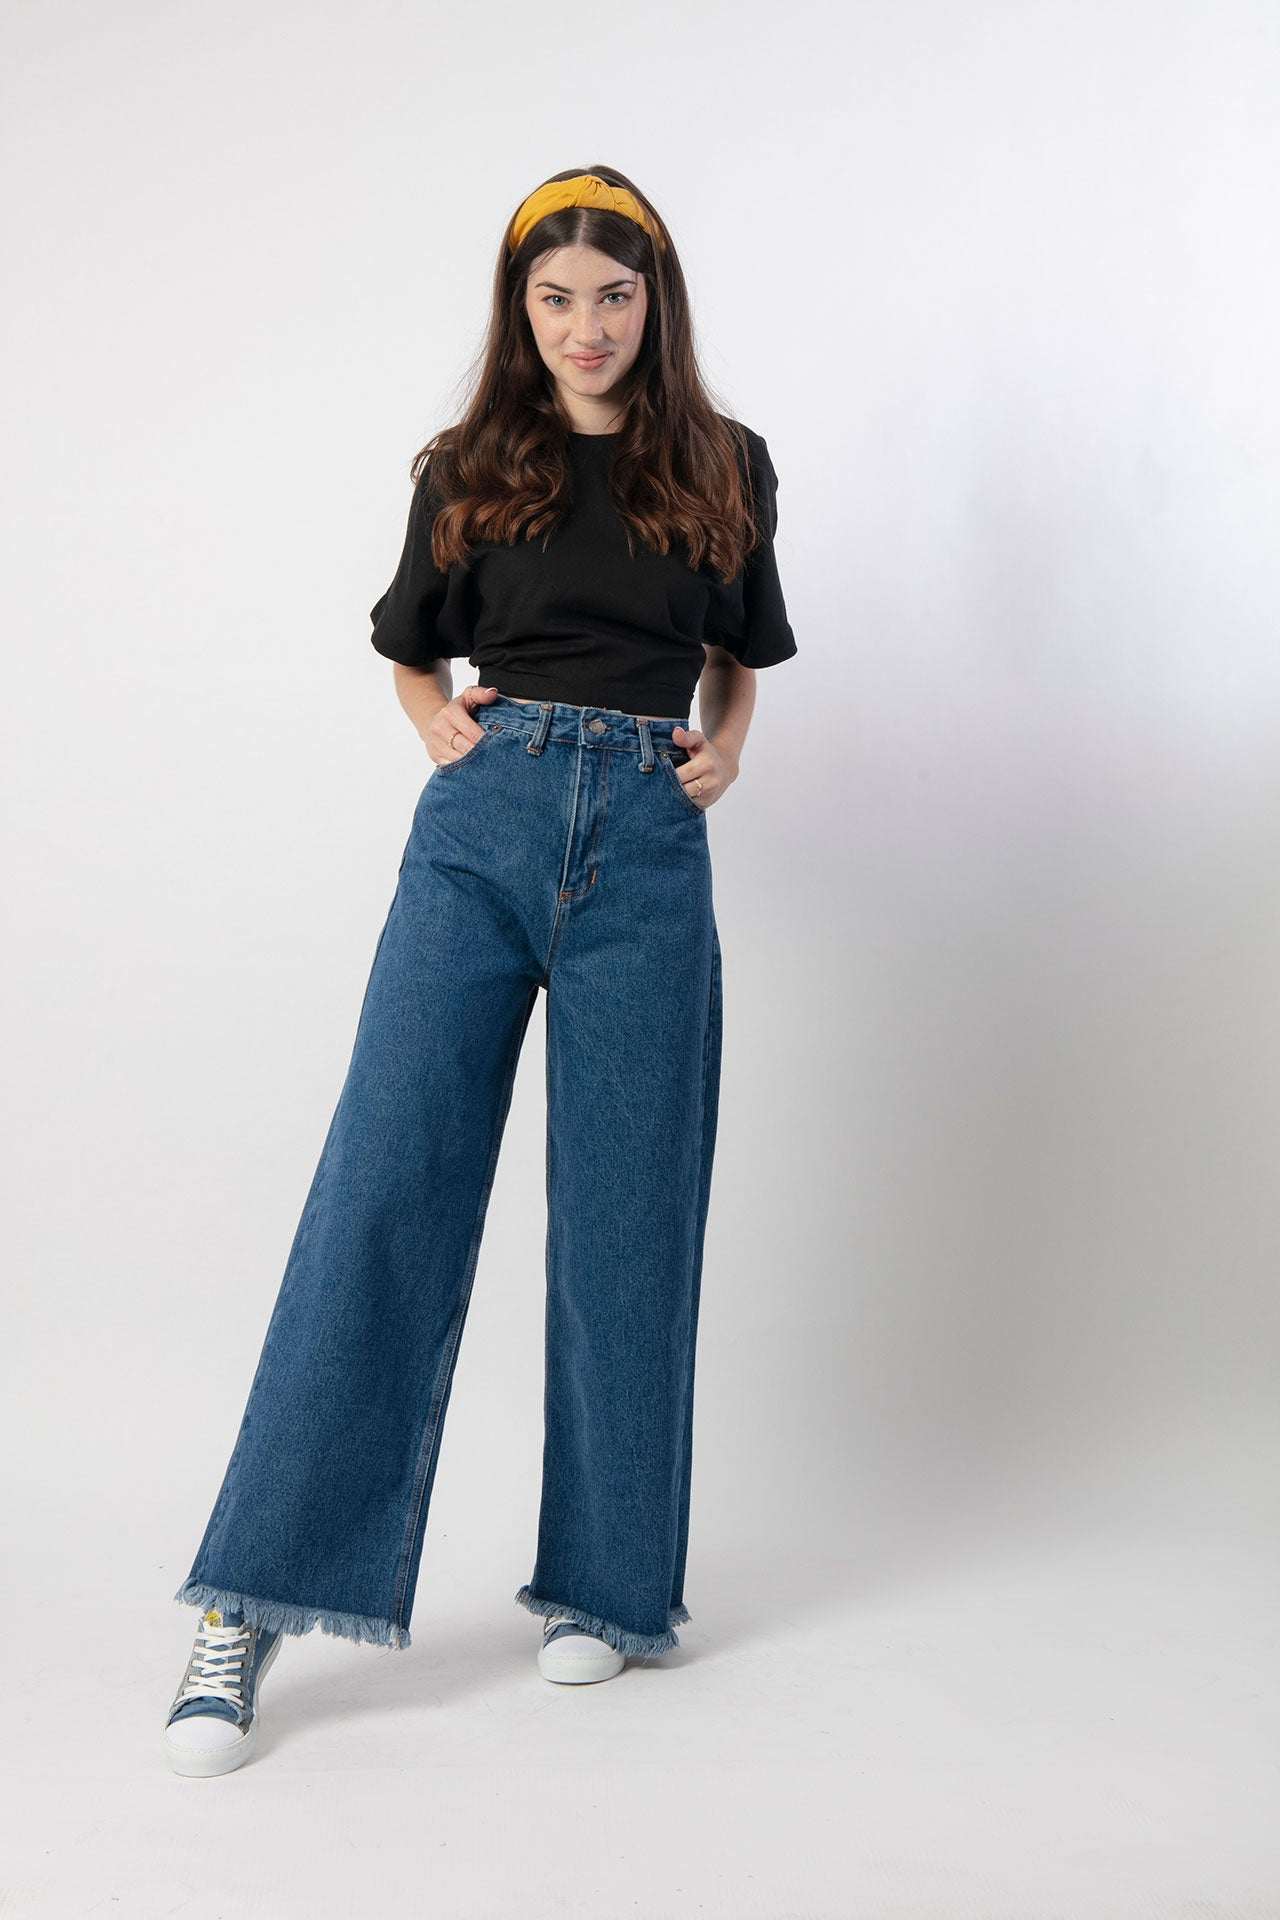 Women's High Waisted Jeans - Bustins Jeans